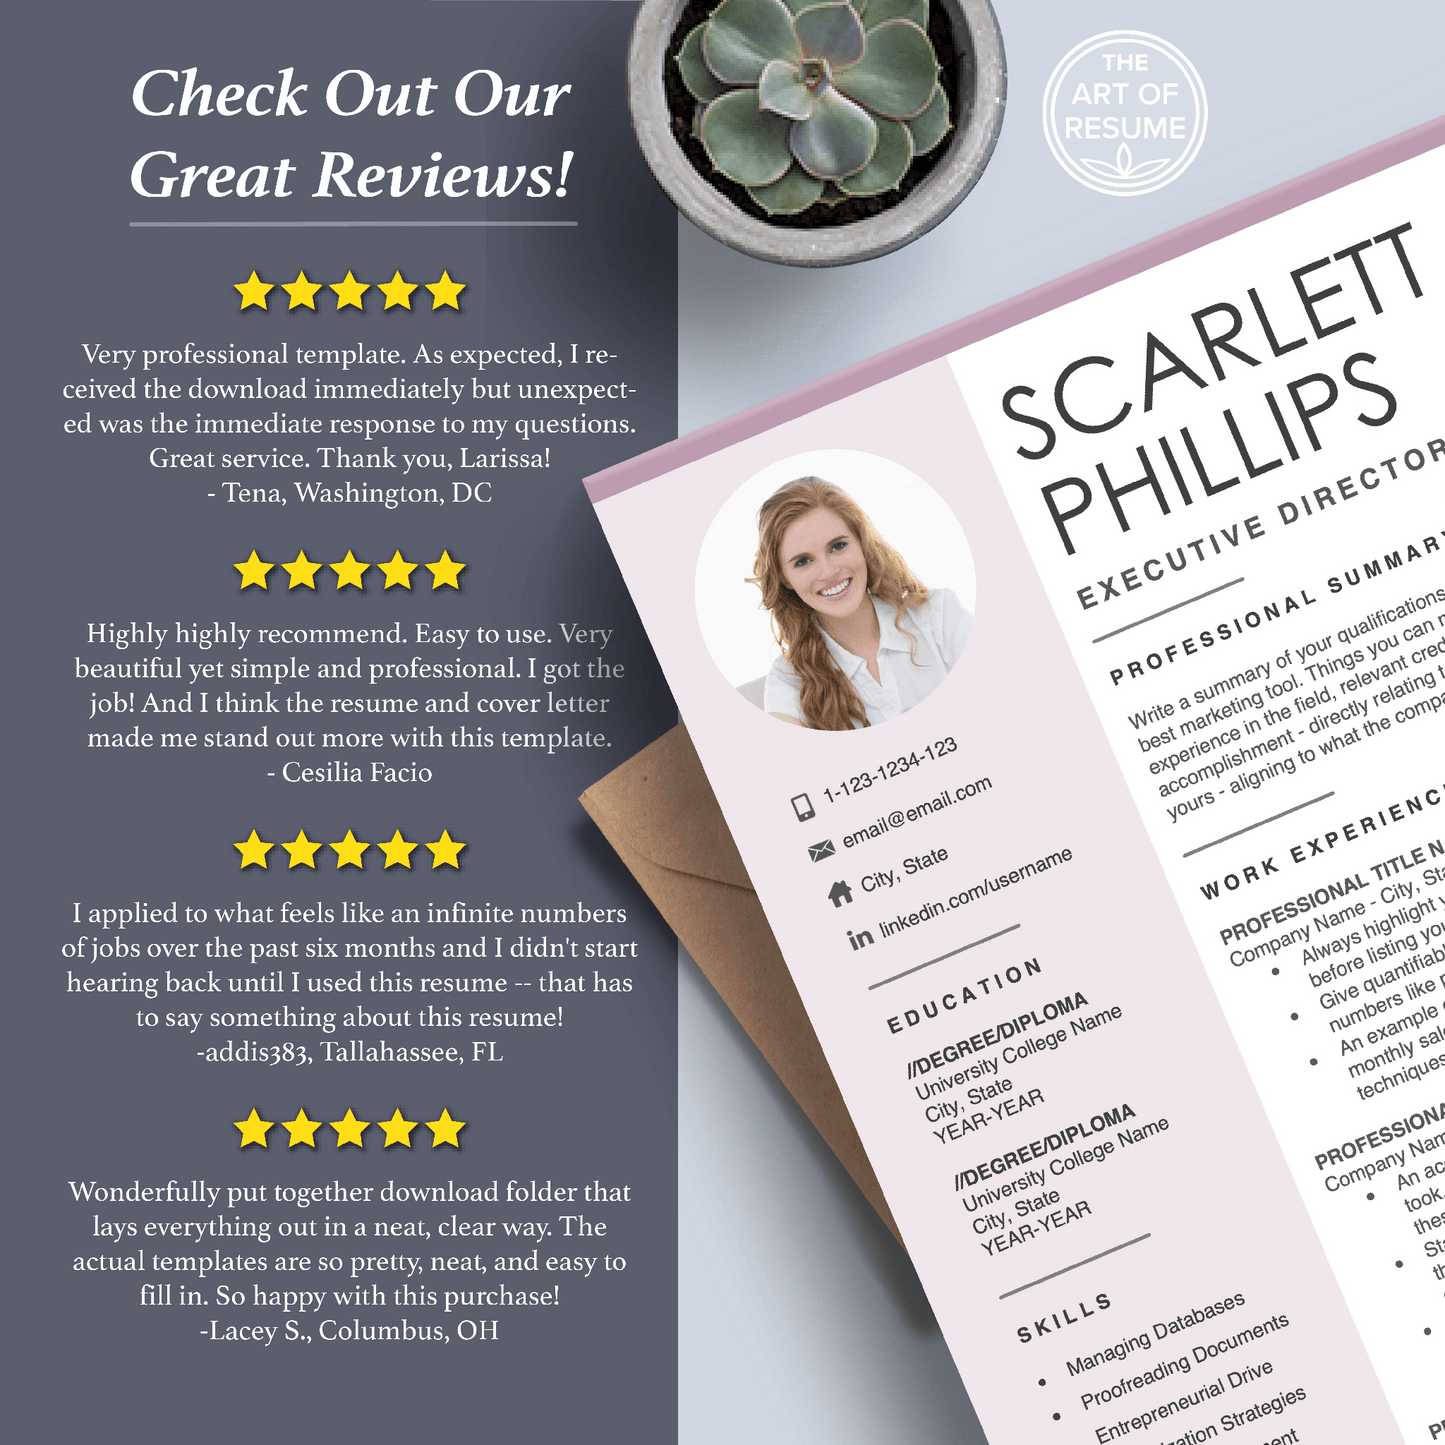 The Art of Resume Templates | Executive C Suite Level Resume CV Templates Online 5-Star Reviews